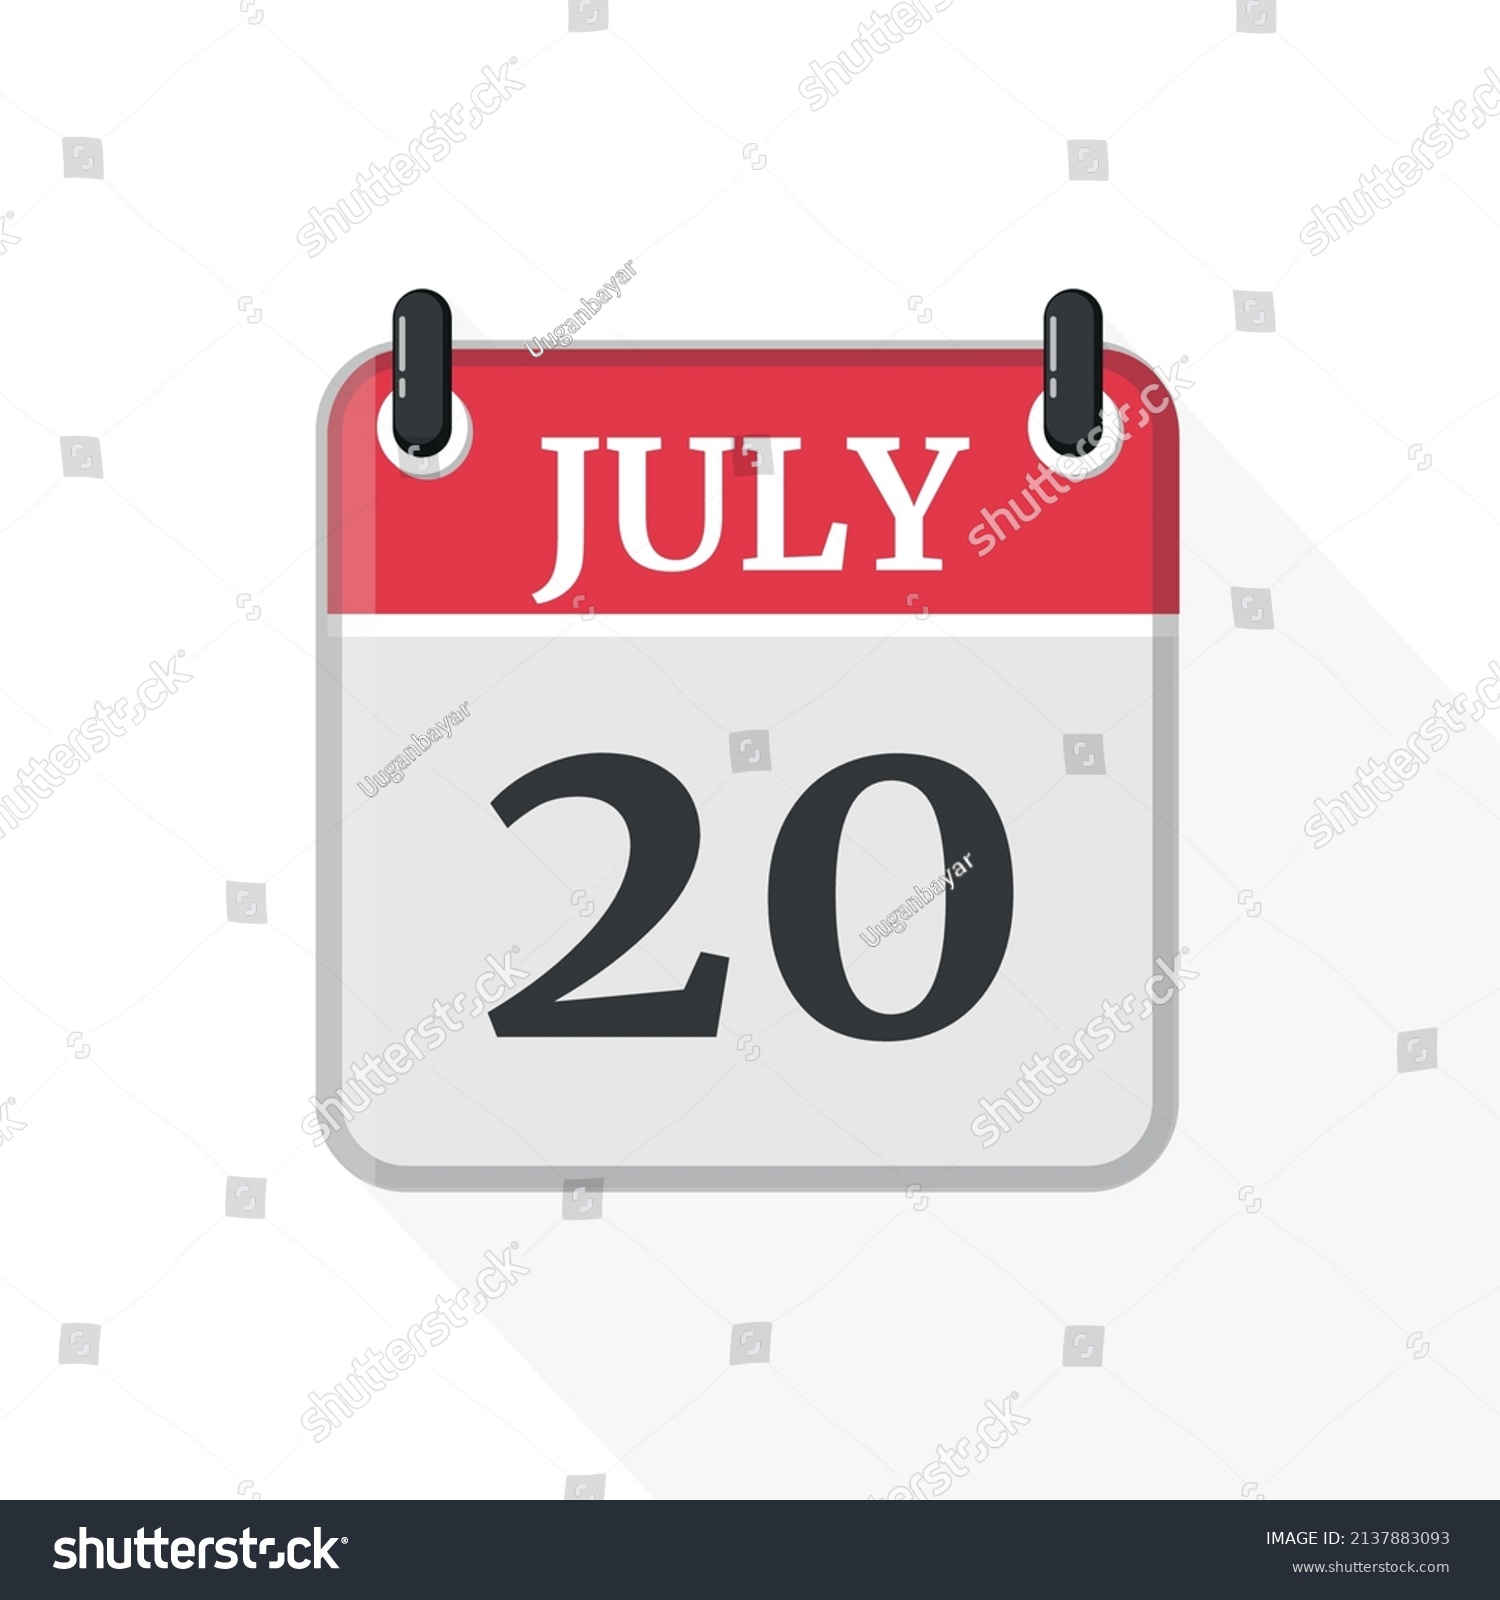 July 20 Calendar On White Background Stock Vector (Royalty Free